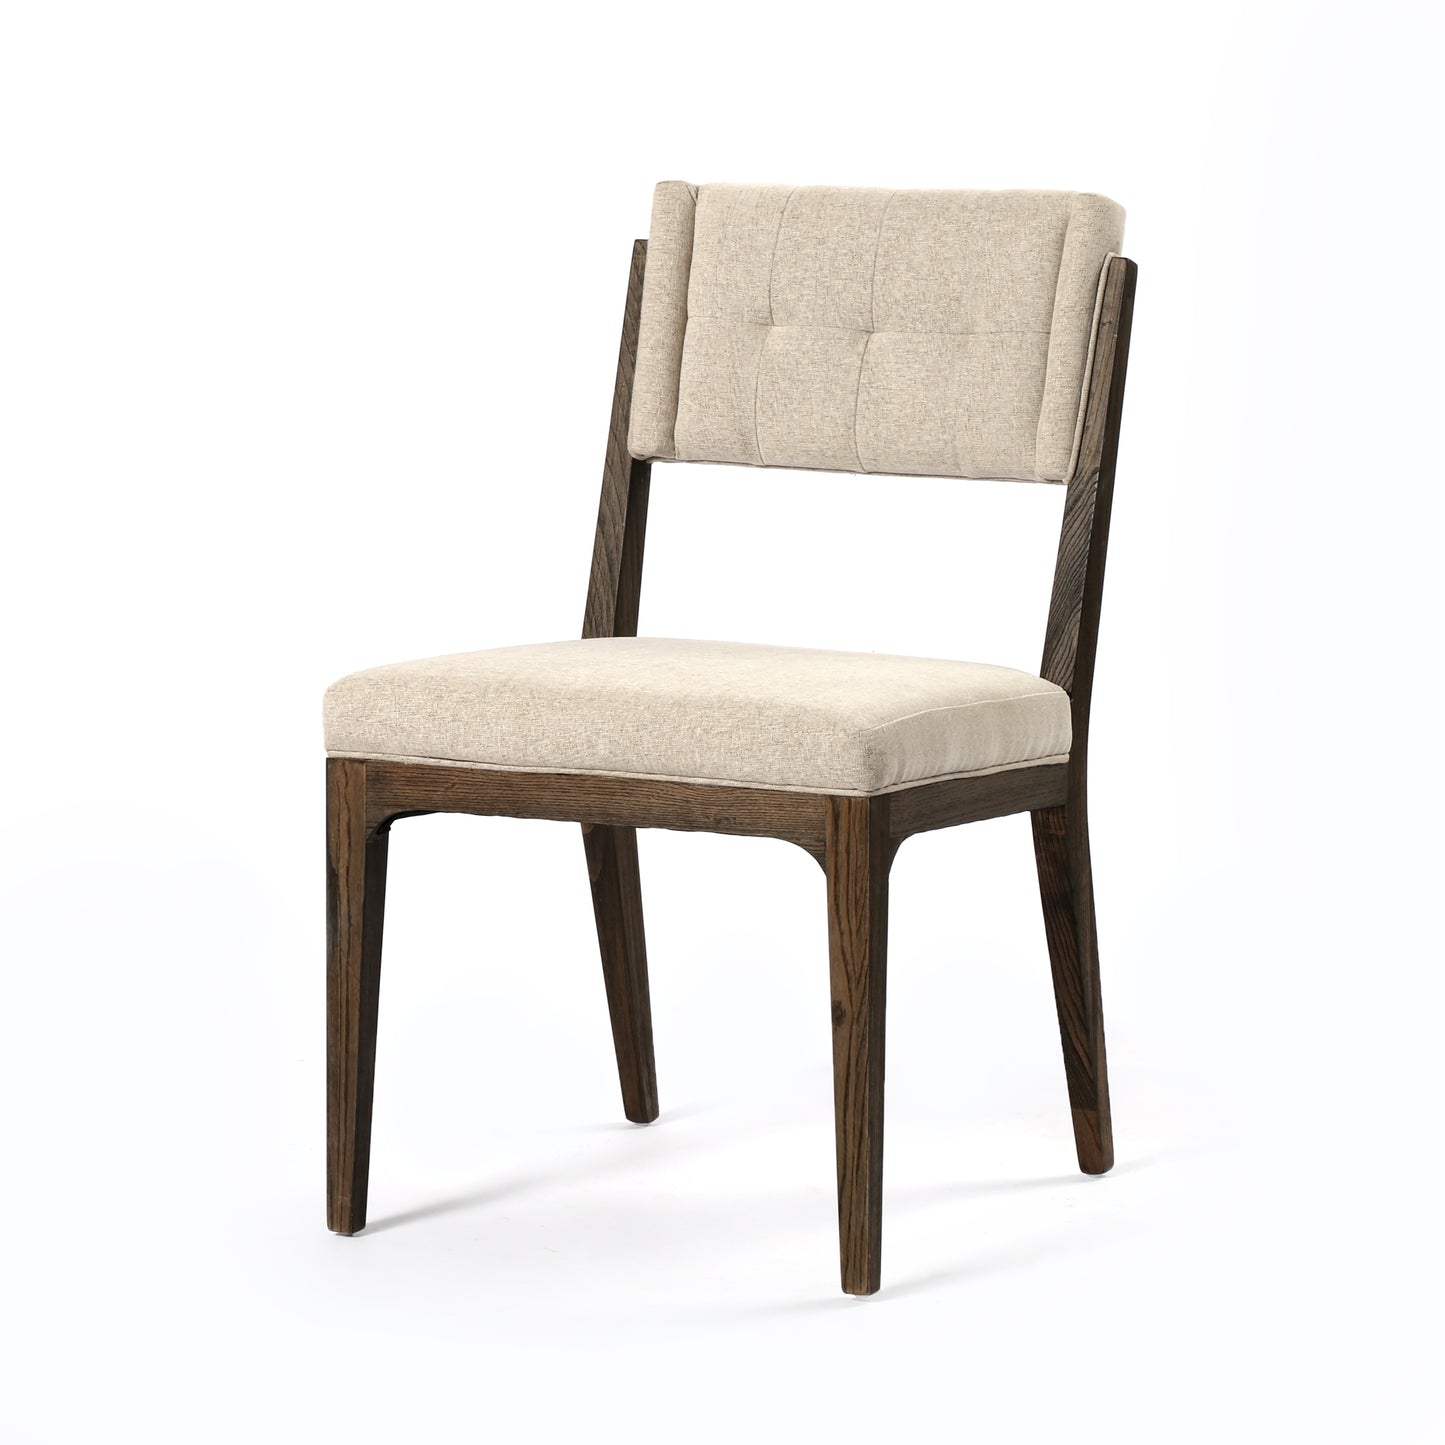 Load image into Gallery viewer, Norton Dining Chair Fulci StoneDining Chair Four Hands  Fulci Stone   Four Hands, Mid Century Modern Furniture, Old Bones Furniture Company, Old Bones Co, Modern Mid Century, Designer Furniture, https://www.oldbonesco.com/
